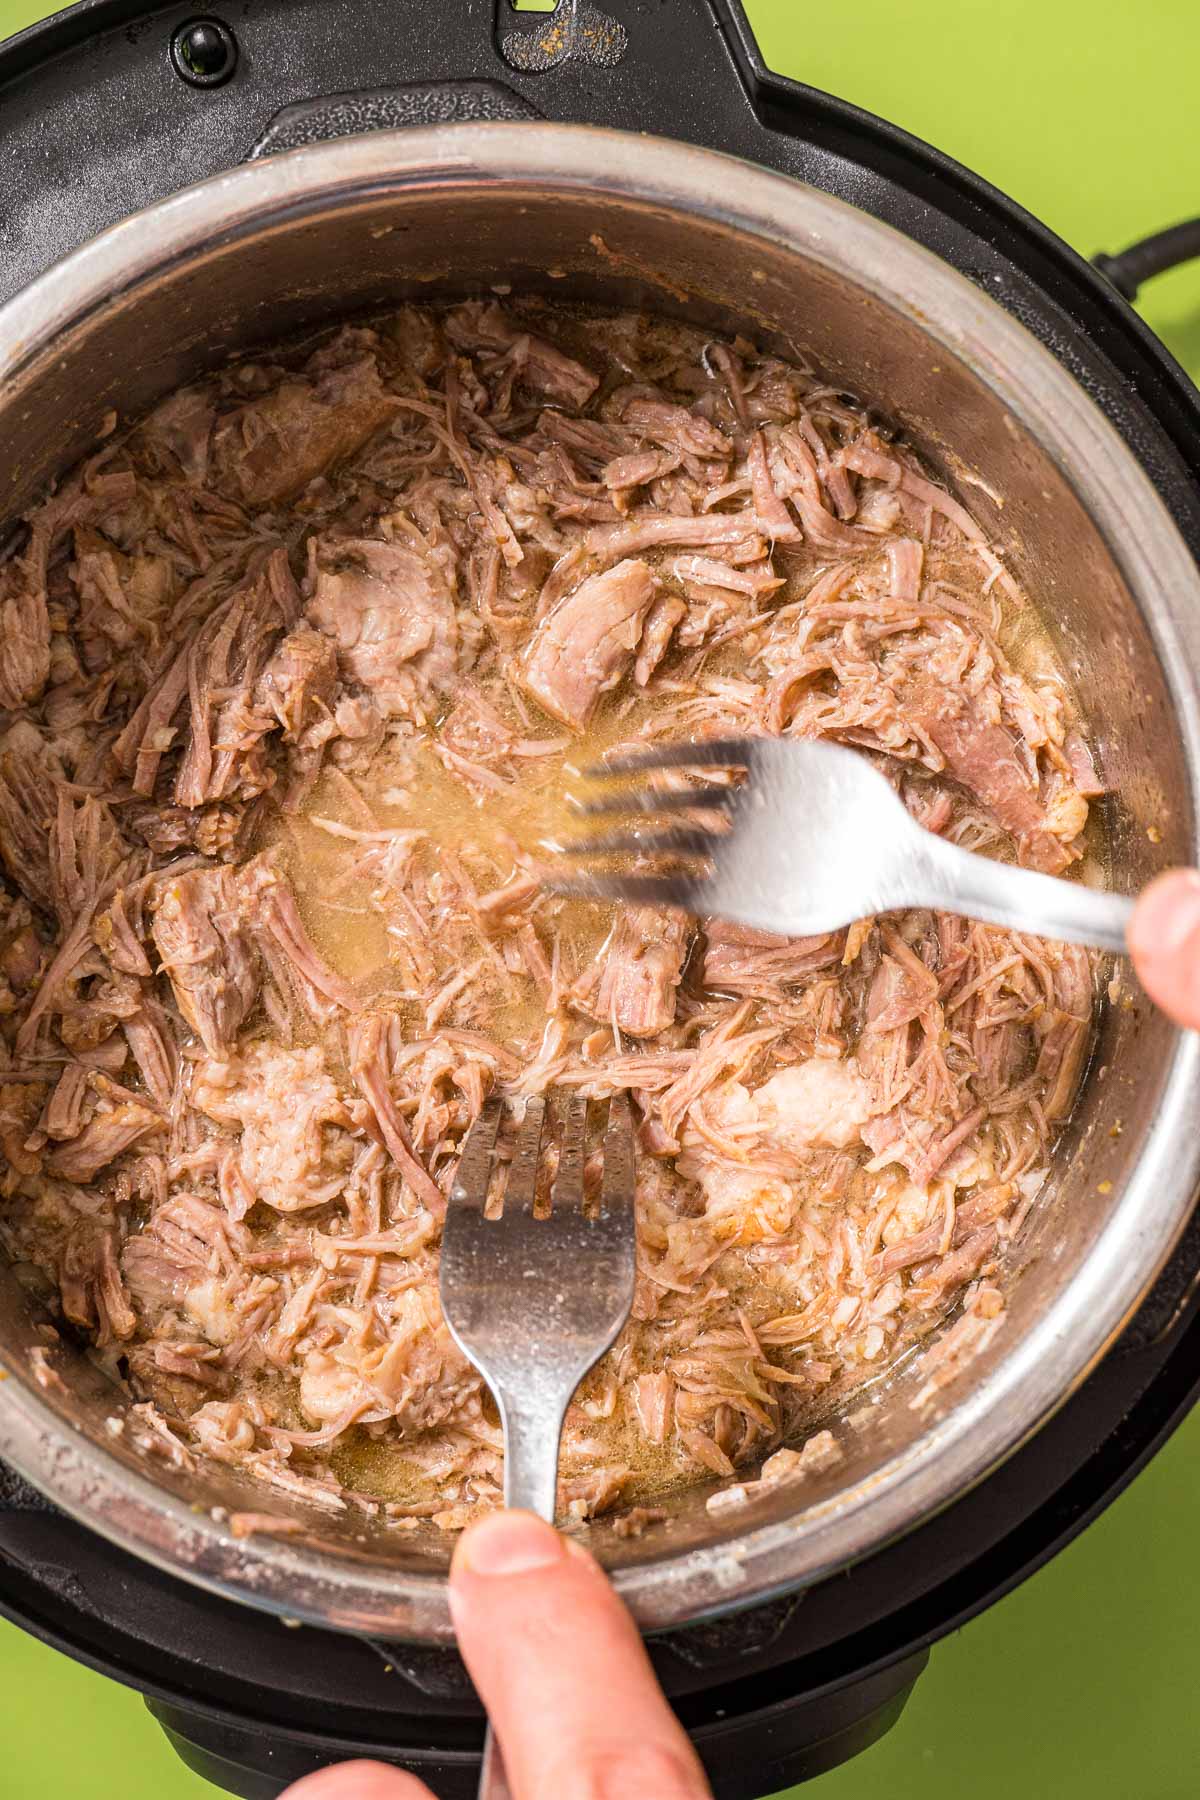 Using two forks to shred cooked carnitas in the instant pot.